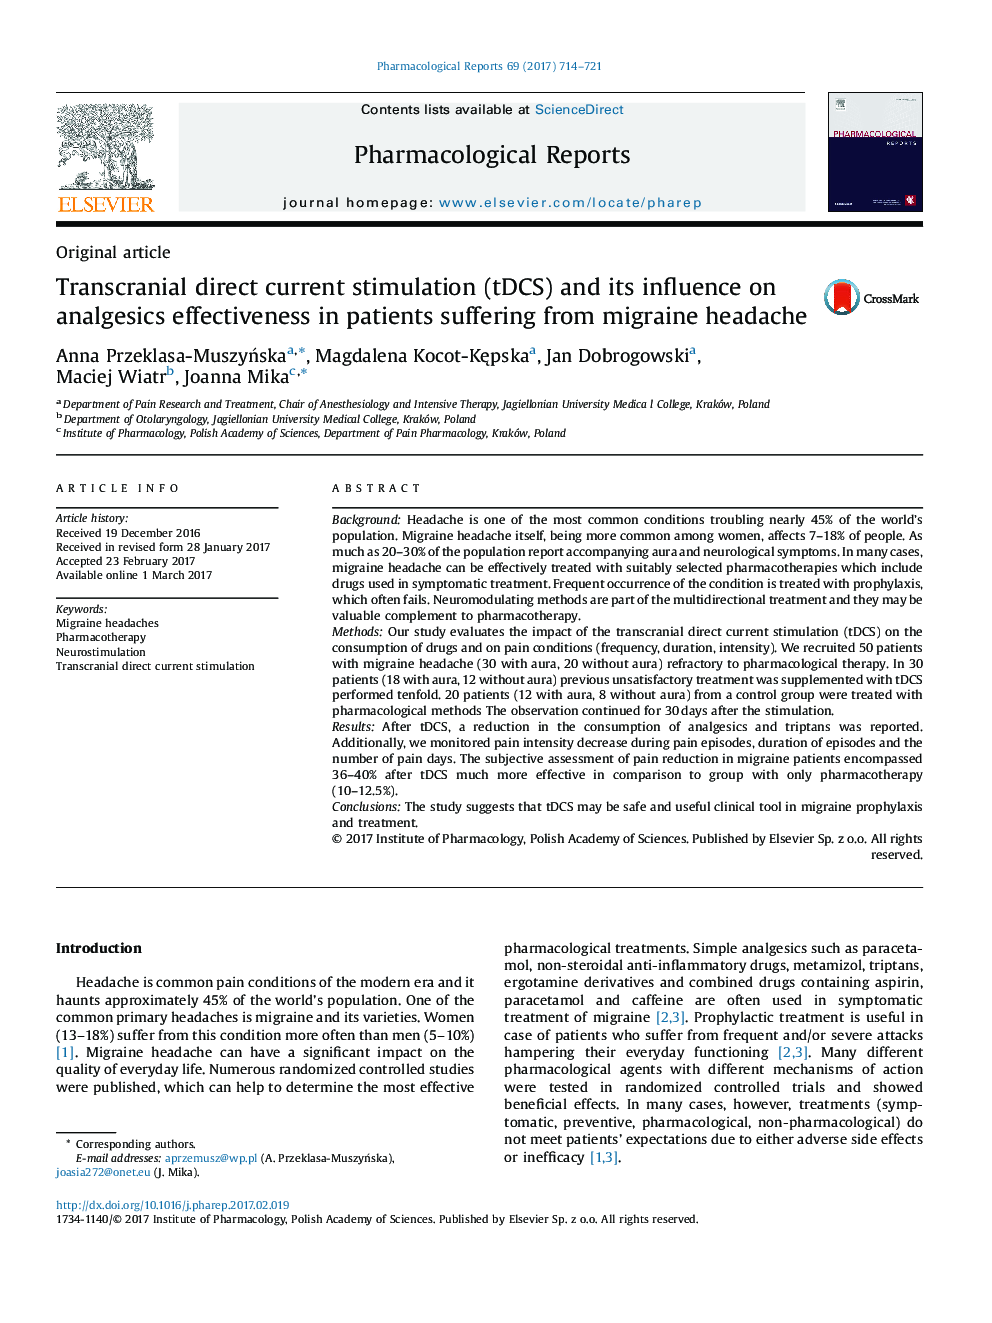 Original articleTranscranial direct current stimulation (tDCS) and its influence on analgesics effectiveness in patients suffering from migraine headache